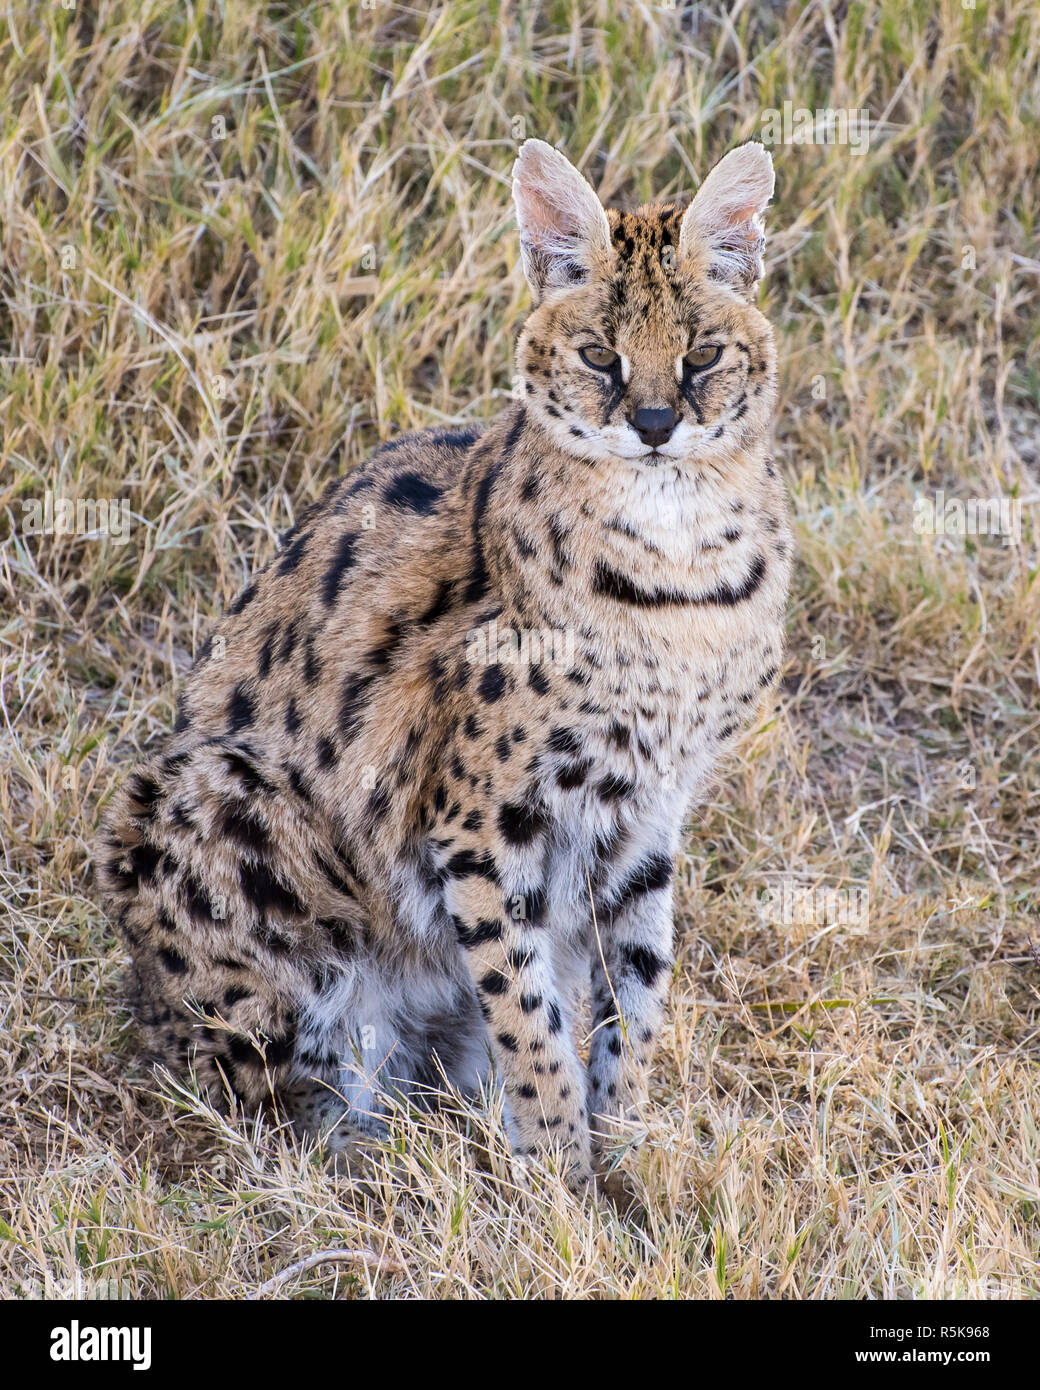 Serval sitting in the Grass Stock Photo